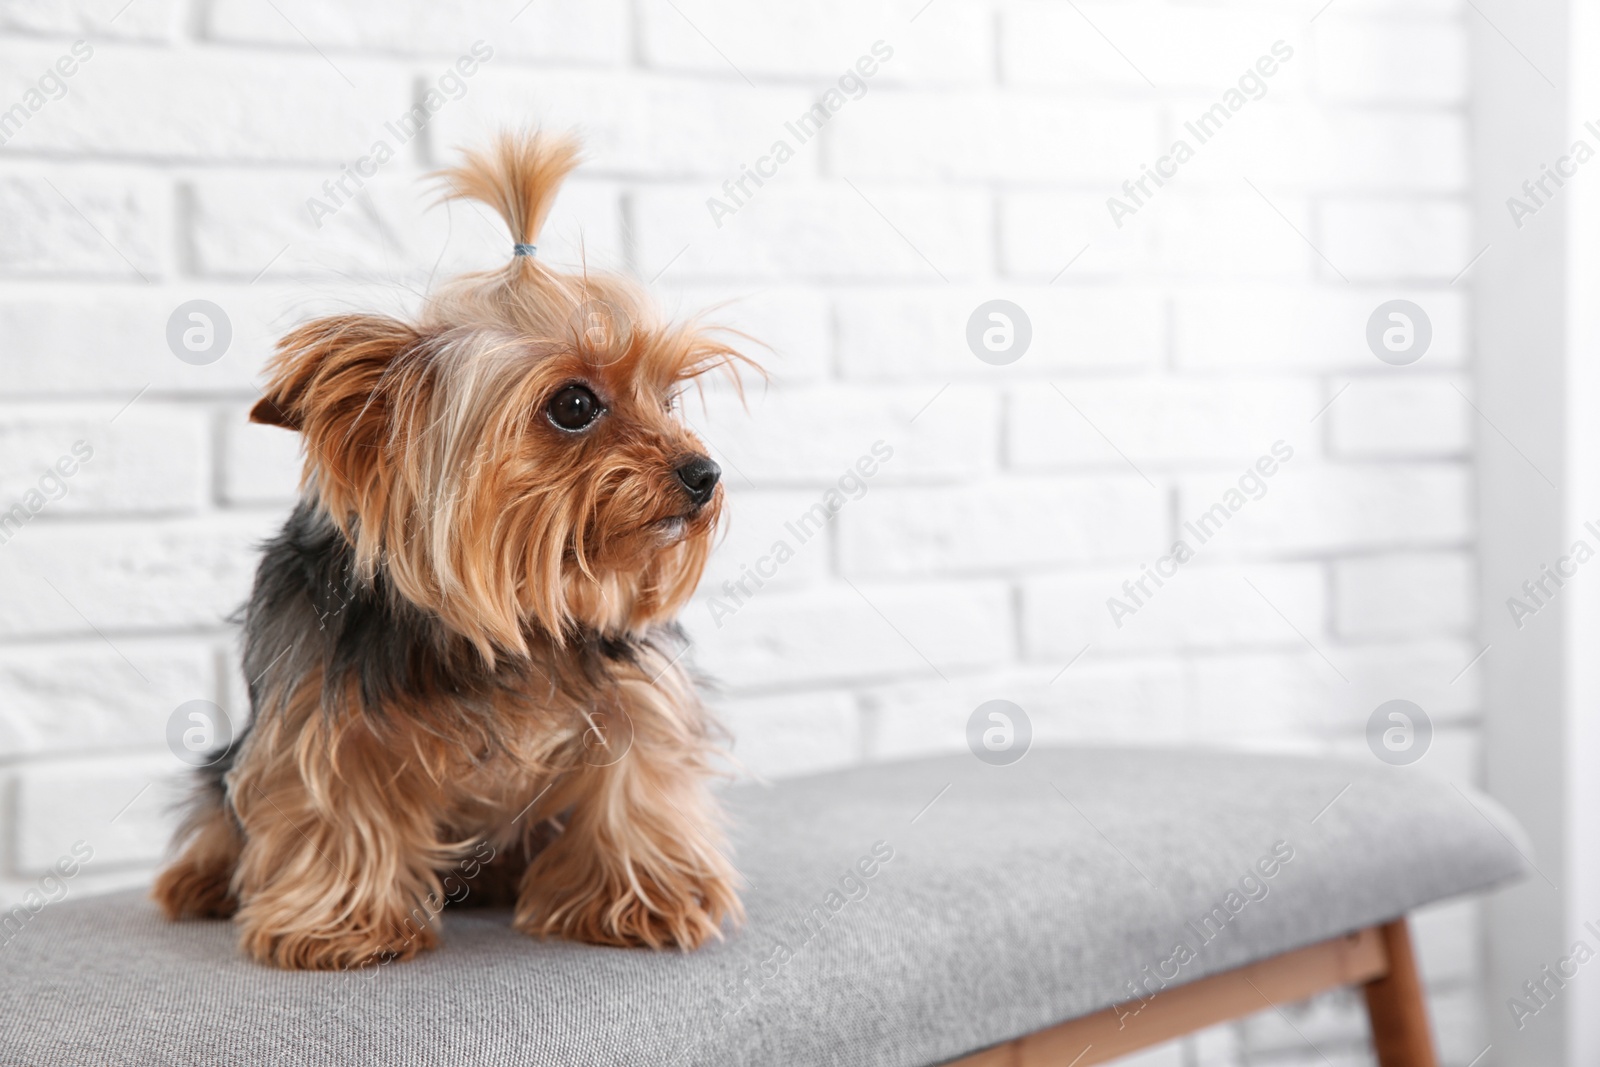 Photo of Yorkshire terrier on bench against brick wall, space for text. Happy dog